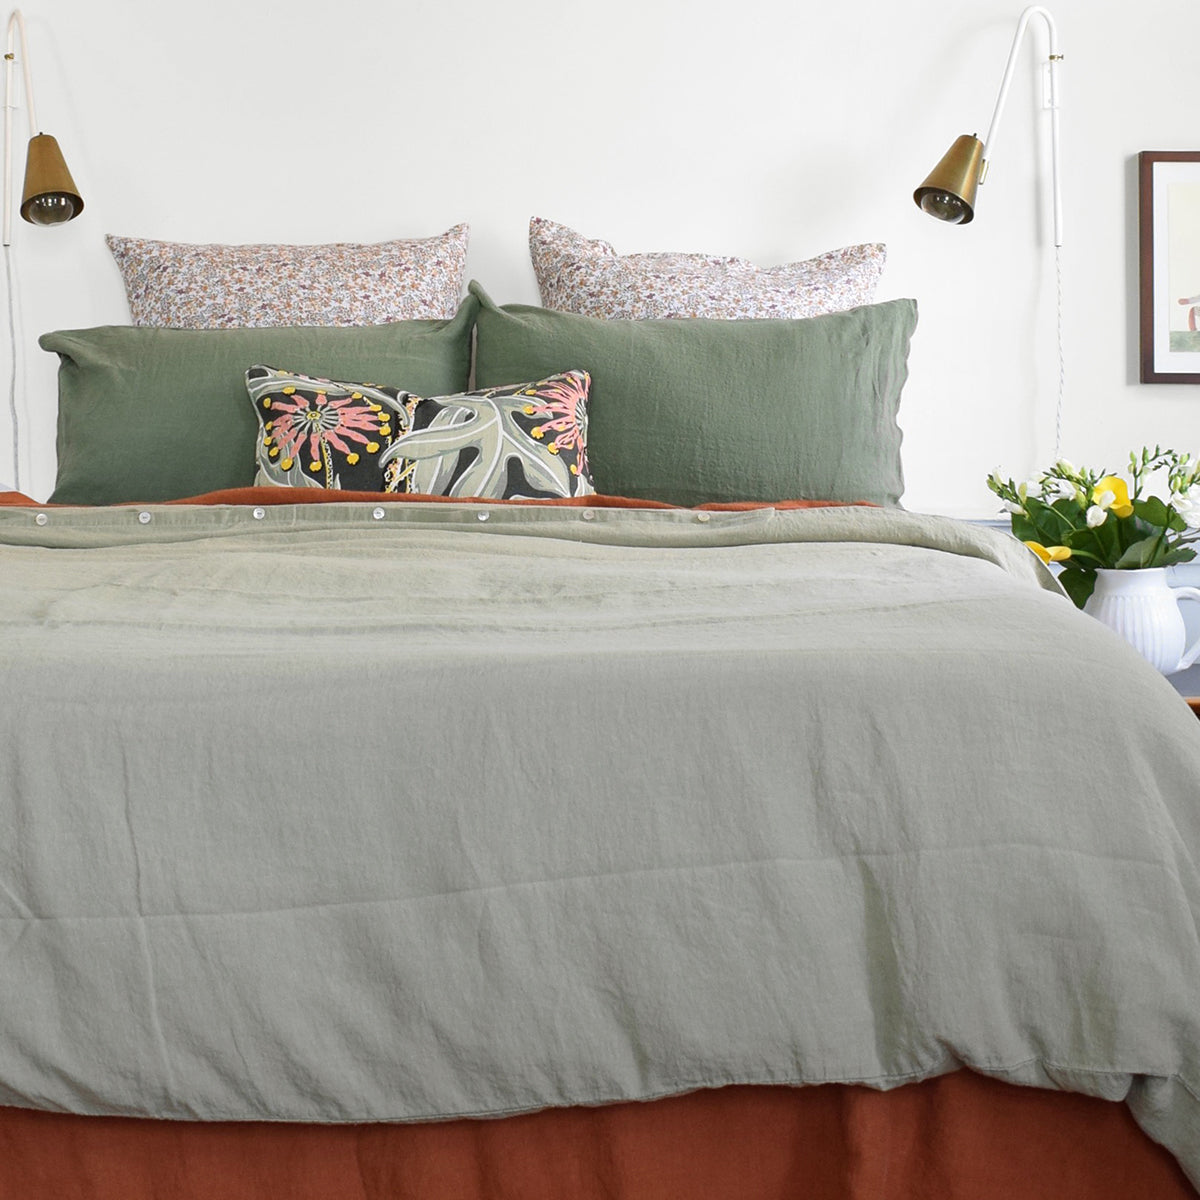 A Linge Particulier Linen Duvet in Fennel gives a olive and camo color to this duvet for a green colorful linen bedding look from Collyer&#39;s Mansion